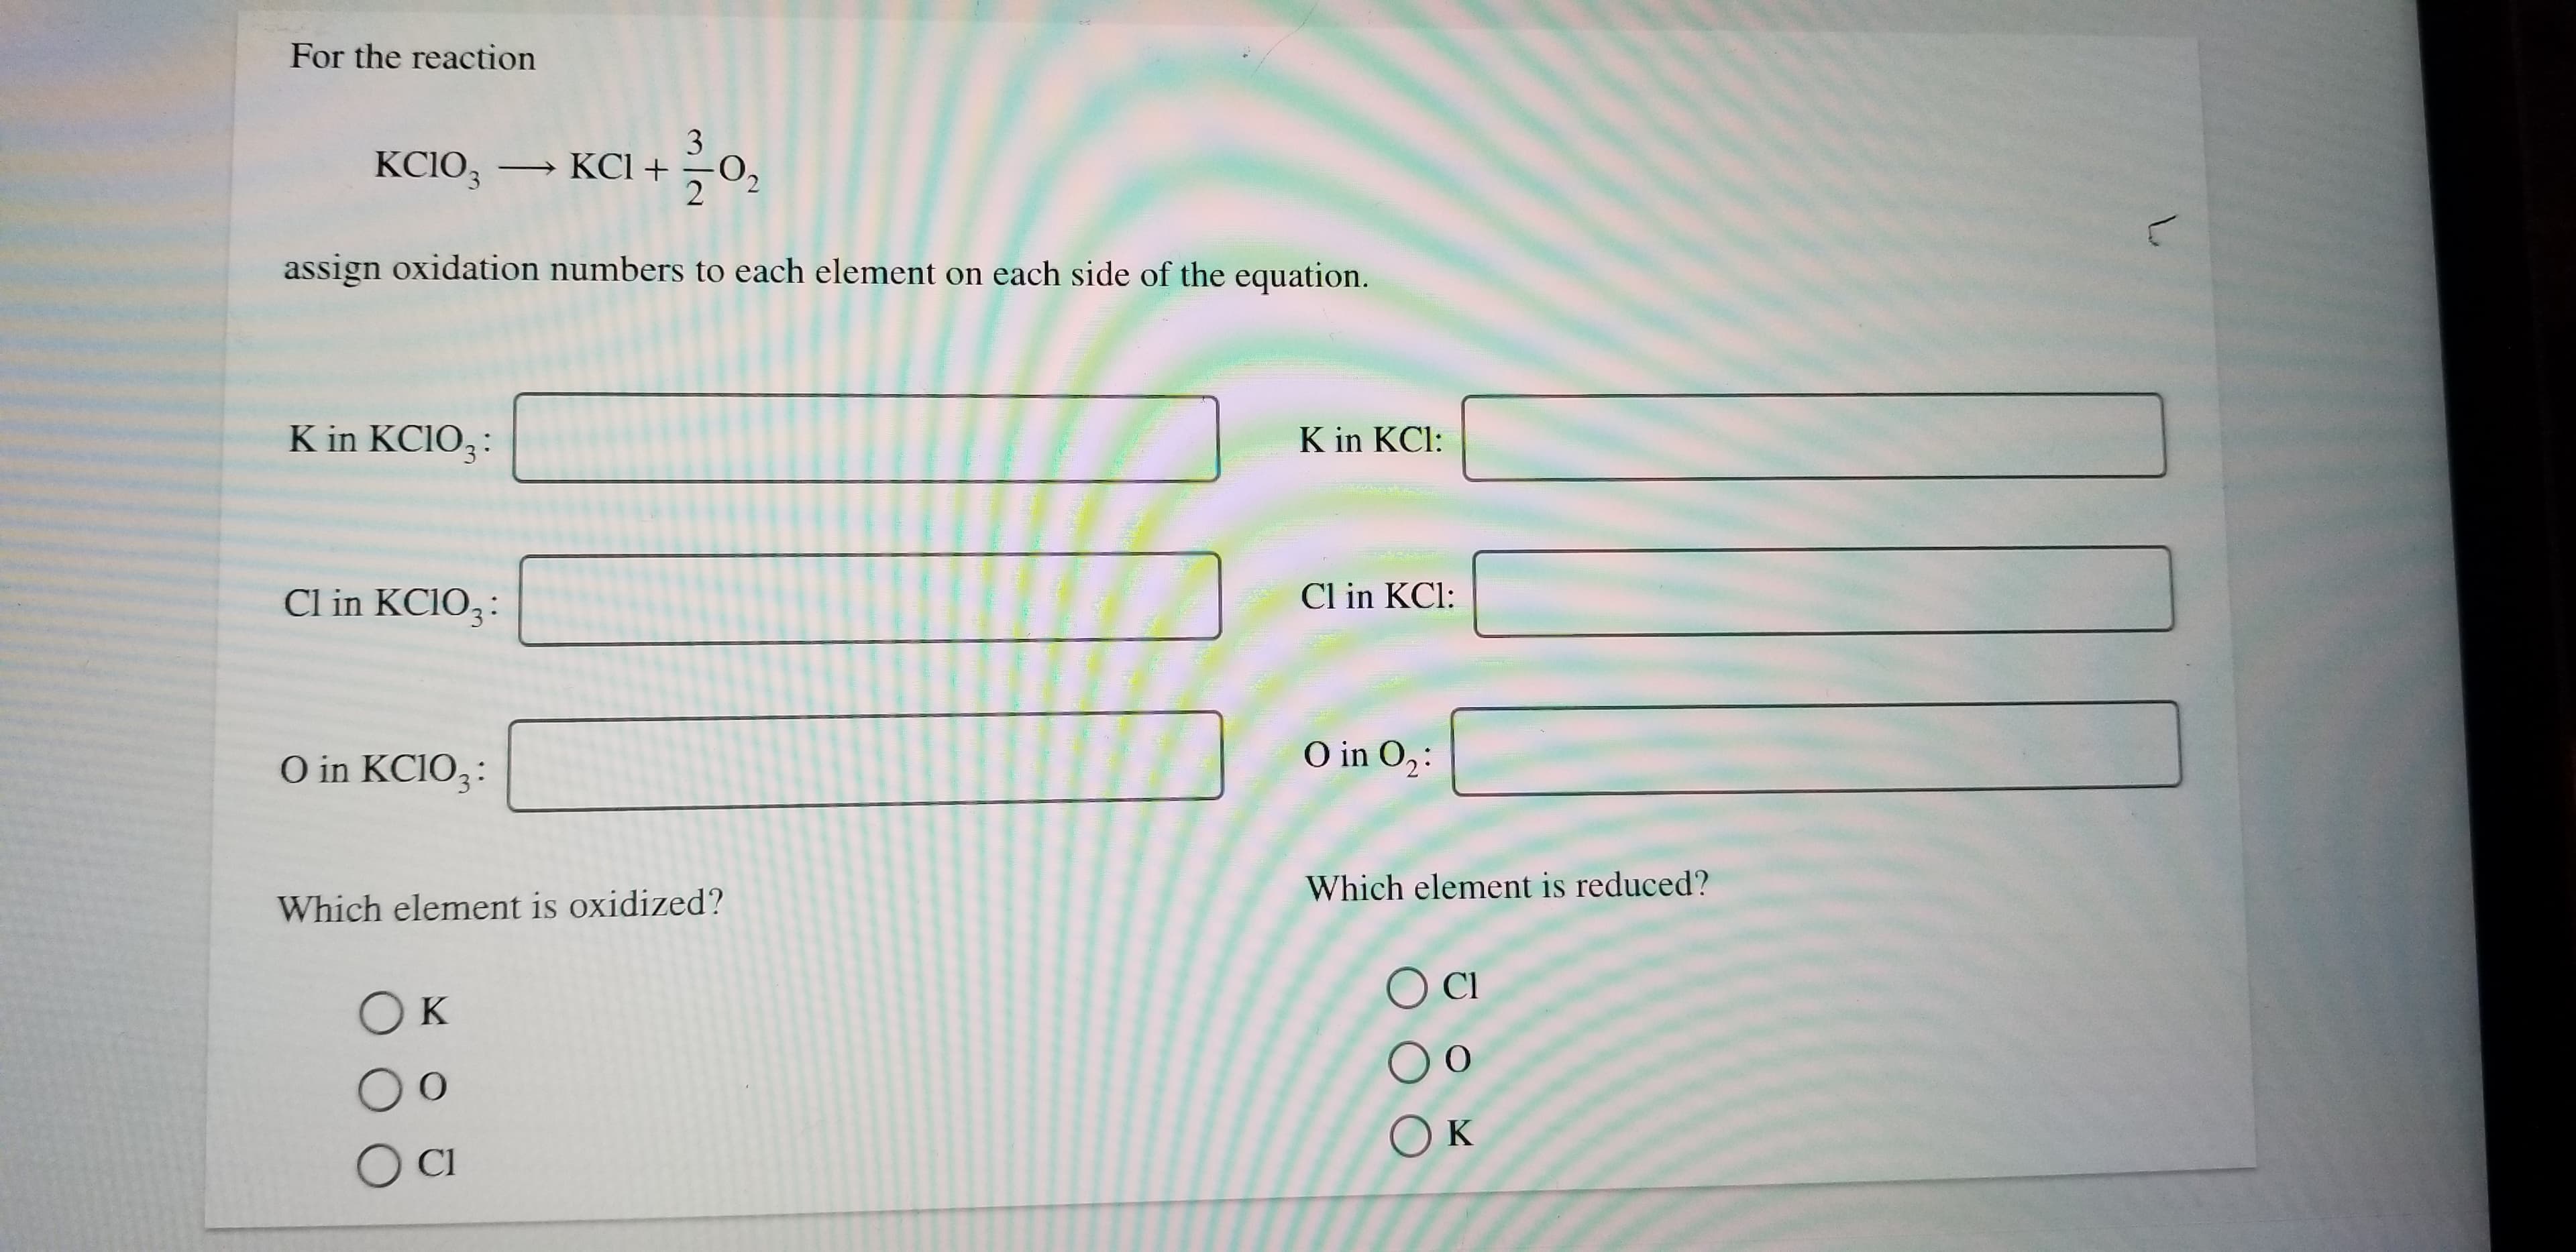 For the reaction
3
KCIO3 KCI
2
assign oxidation numbers to each element on each side of the equation.
K in KCIO3
K in KCl:
Cl in KCIO3
Cl in KCl:
O in O2
O in KCIO3
Which element is reduced?
Which element is oxidized?
Cl
Ок
Ок
OC
L
